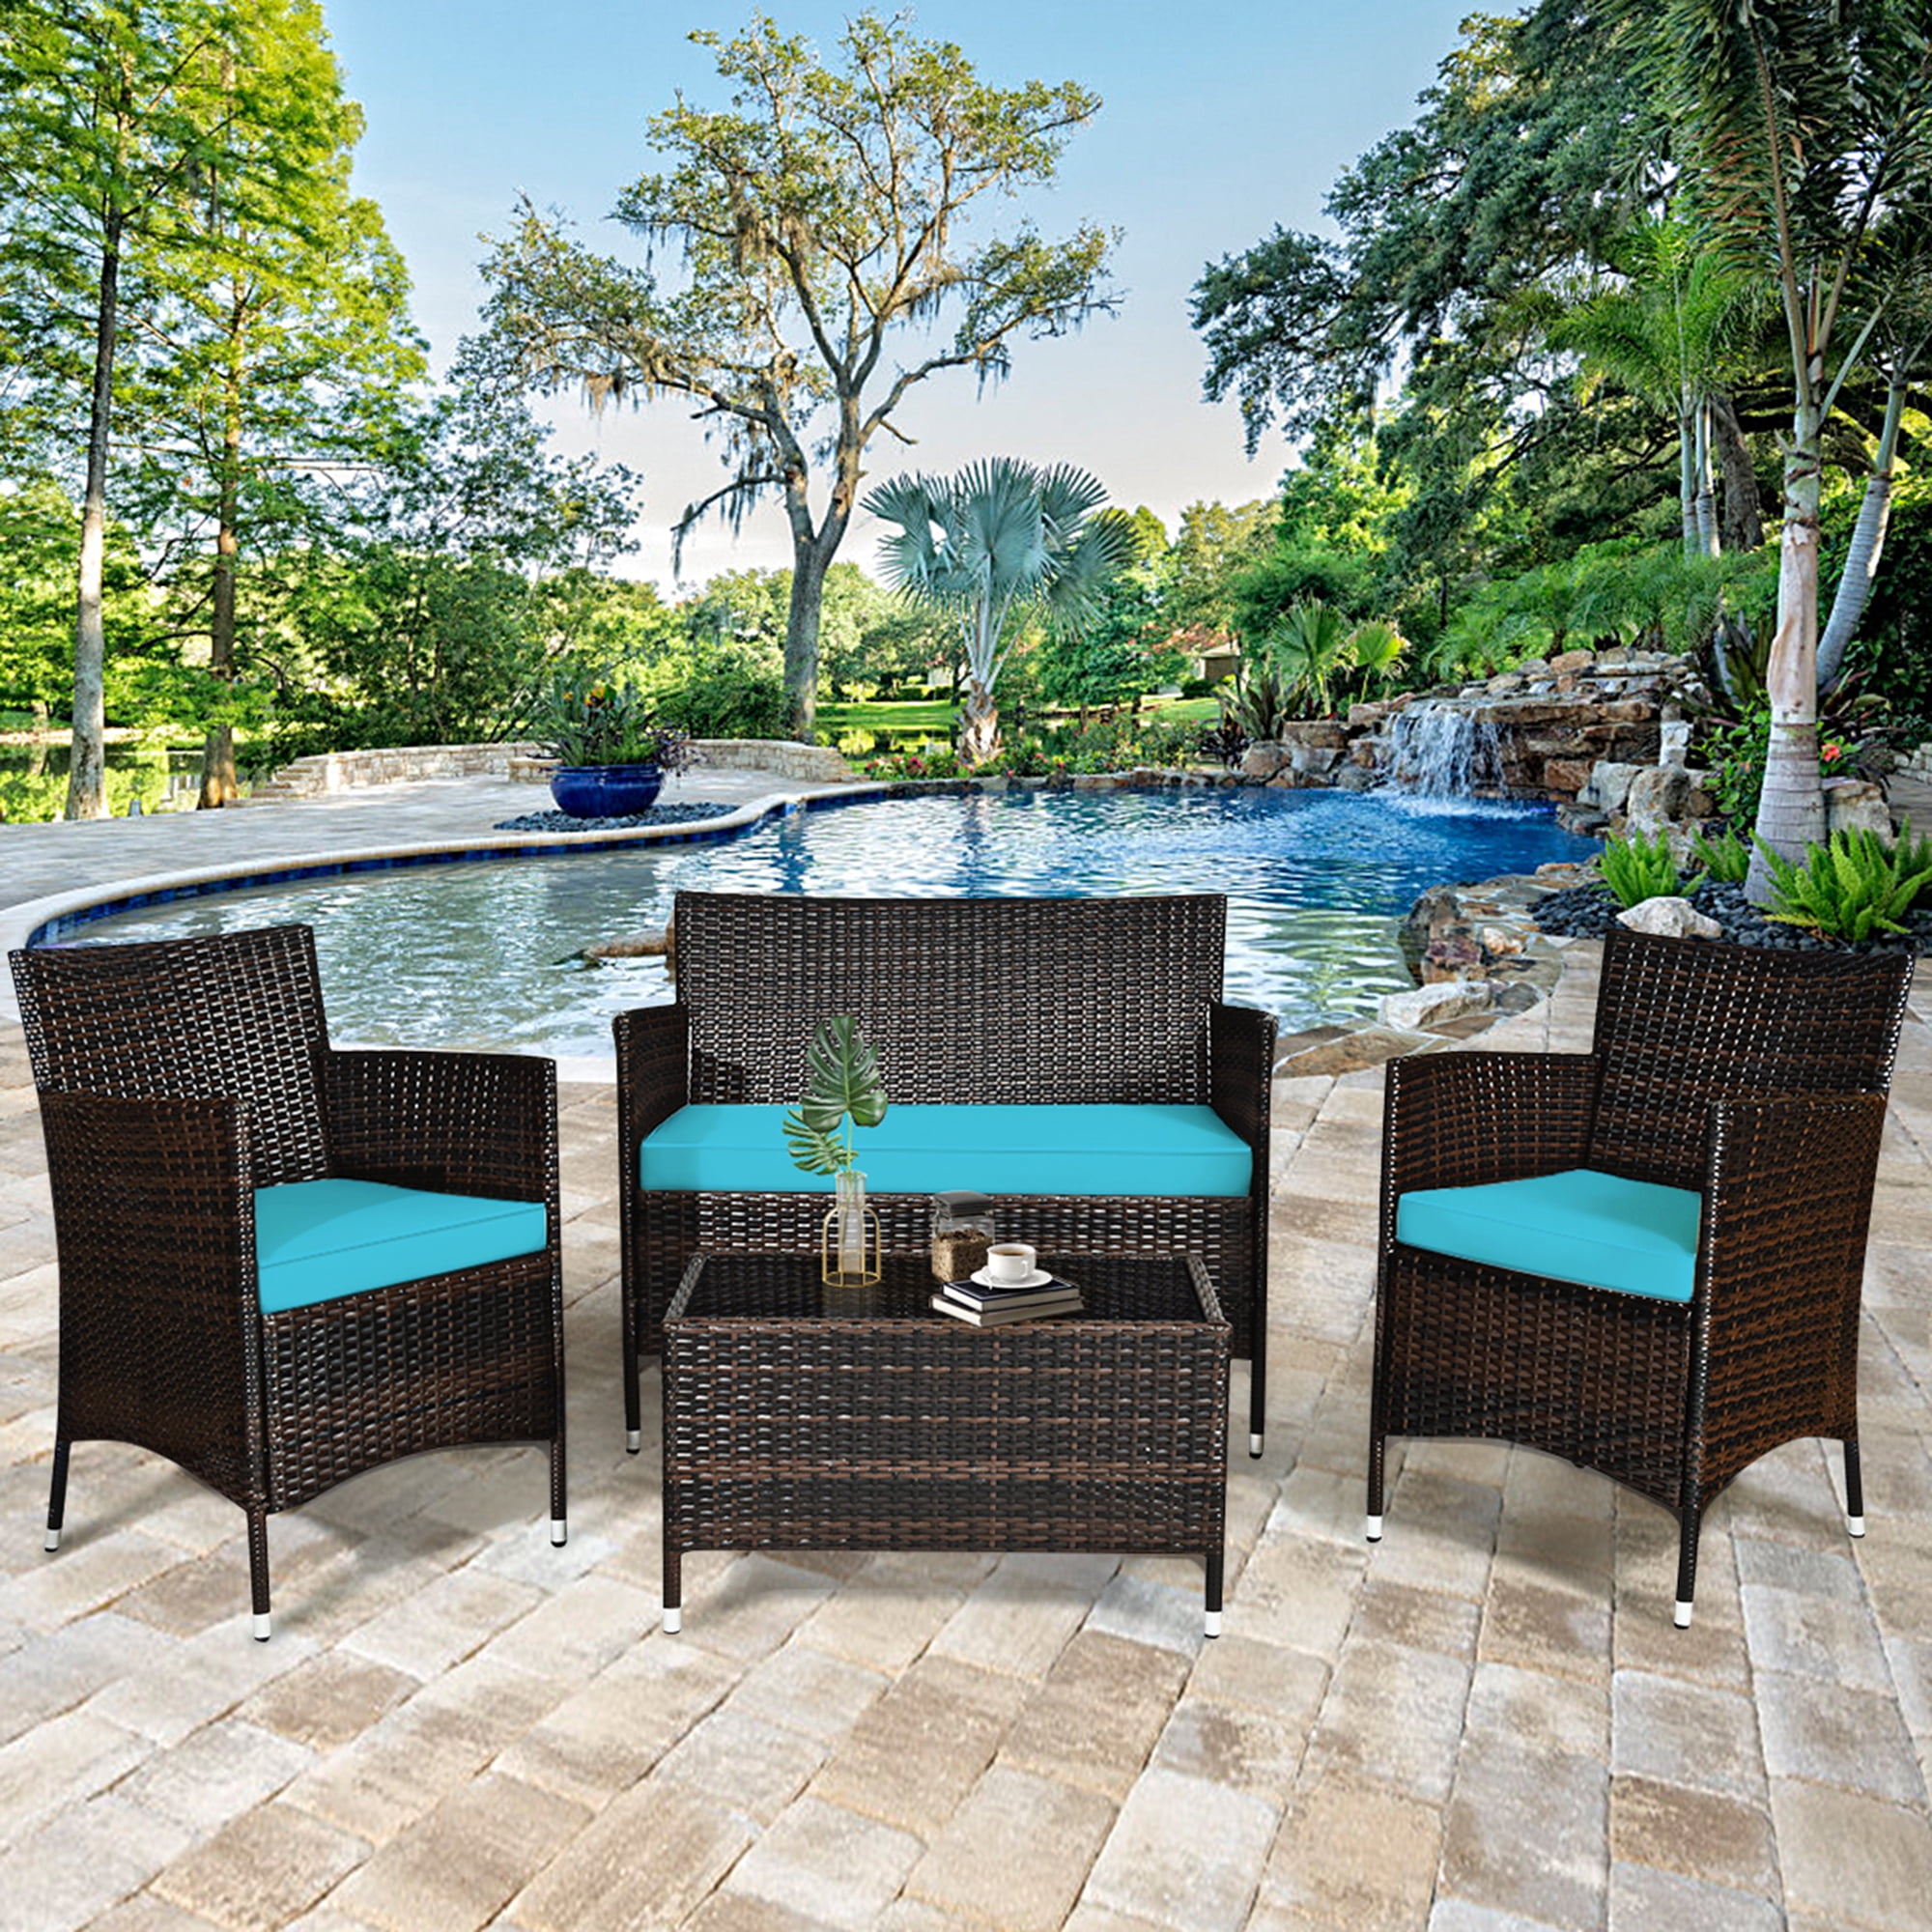 Durable And Weather resistant Outdoor Furniture